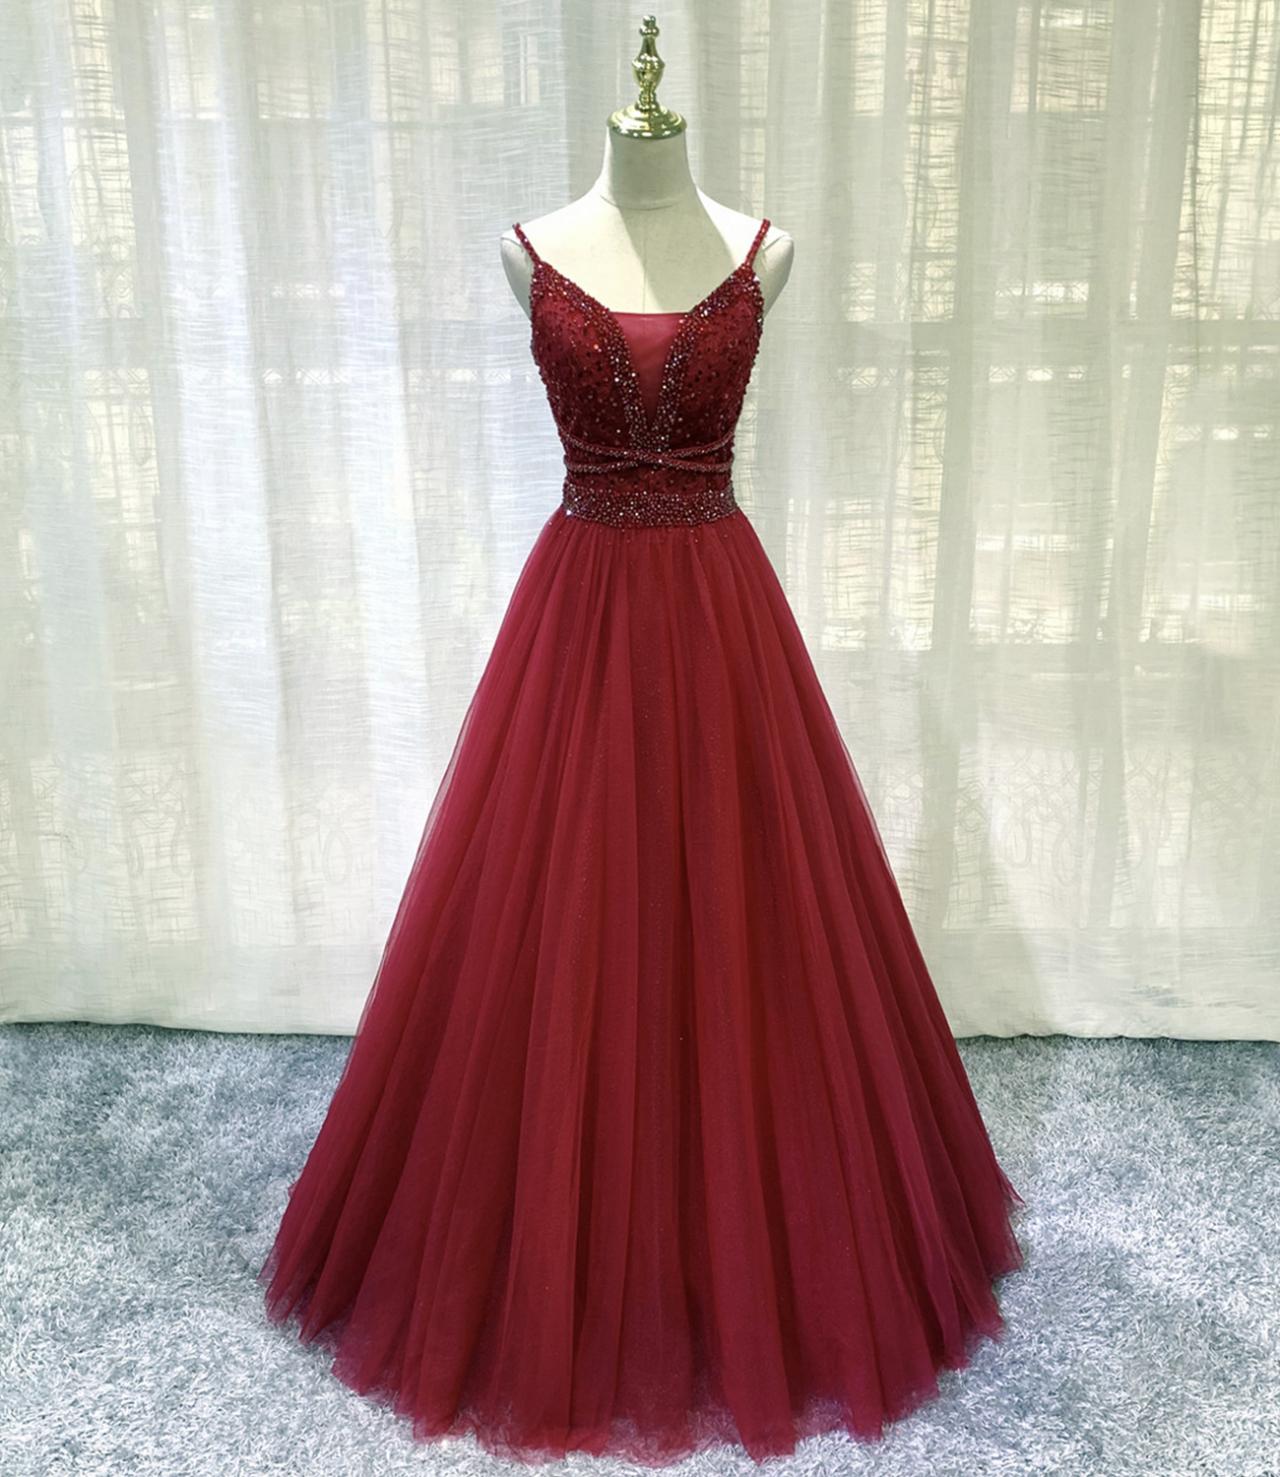 Elegant Tulle Beads Formal Prom Dress, Beautiful Long Prom Dress, Banquet Party Dress